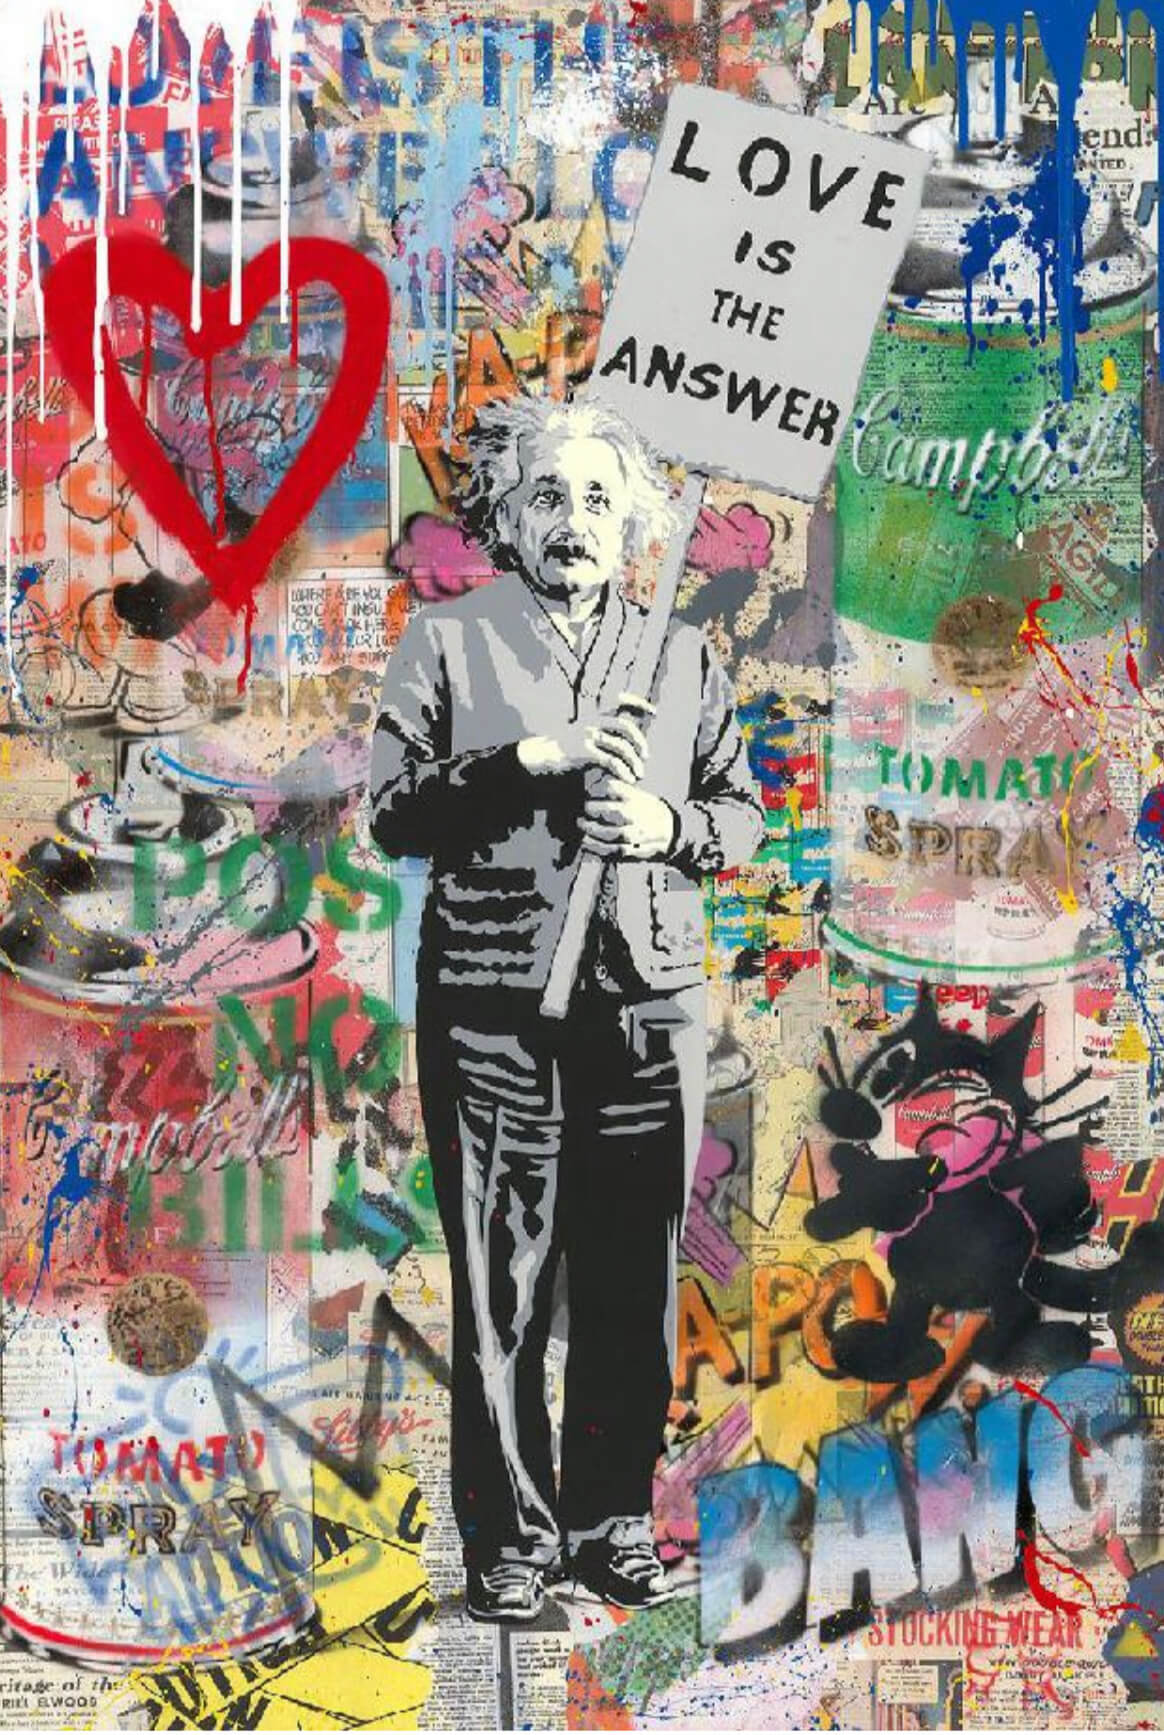 "Einstein" by Mr. Brainwash, on view in the Time2Play exhibition, Image: Courtesy White Room Gallery